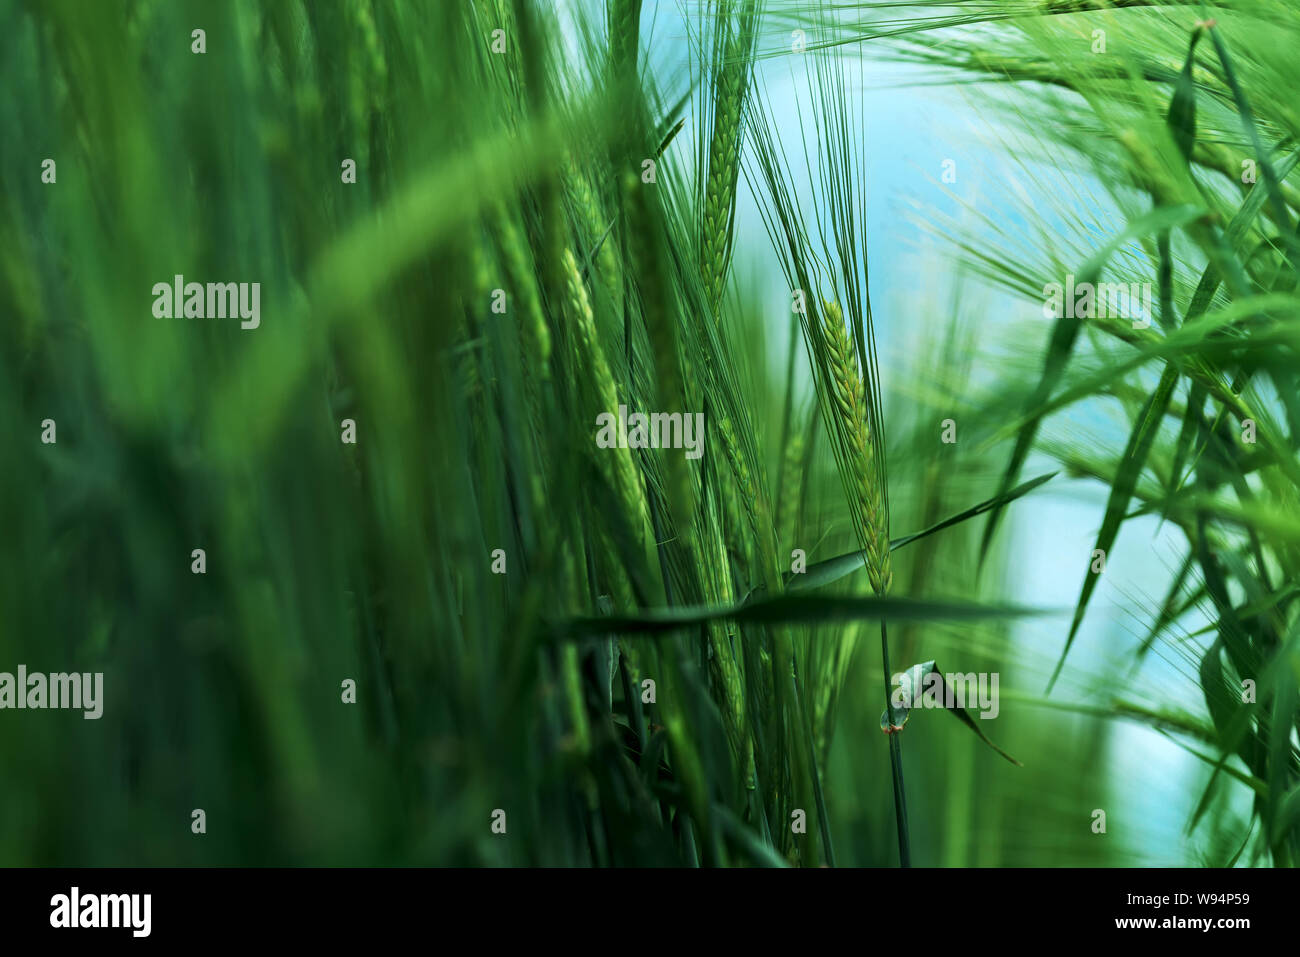 Barley (Hordeum vulgare) cereal crop ripening in agricultural field Stock Photo